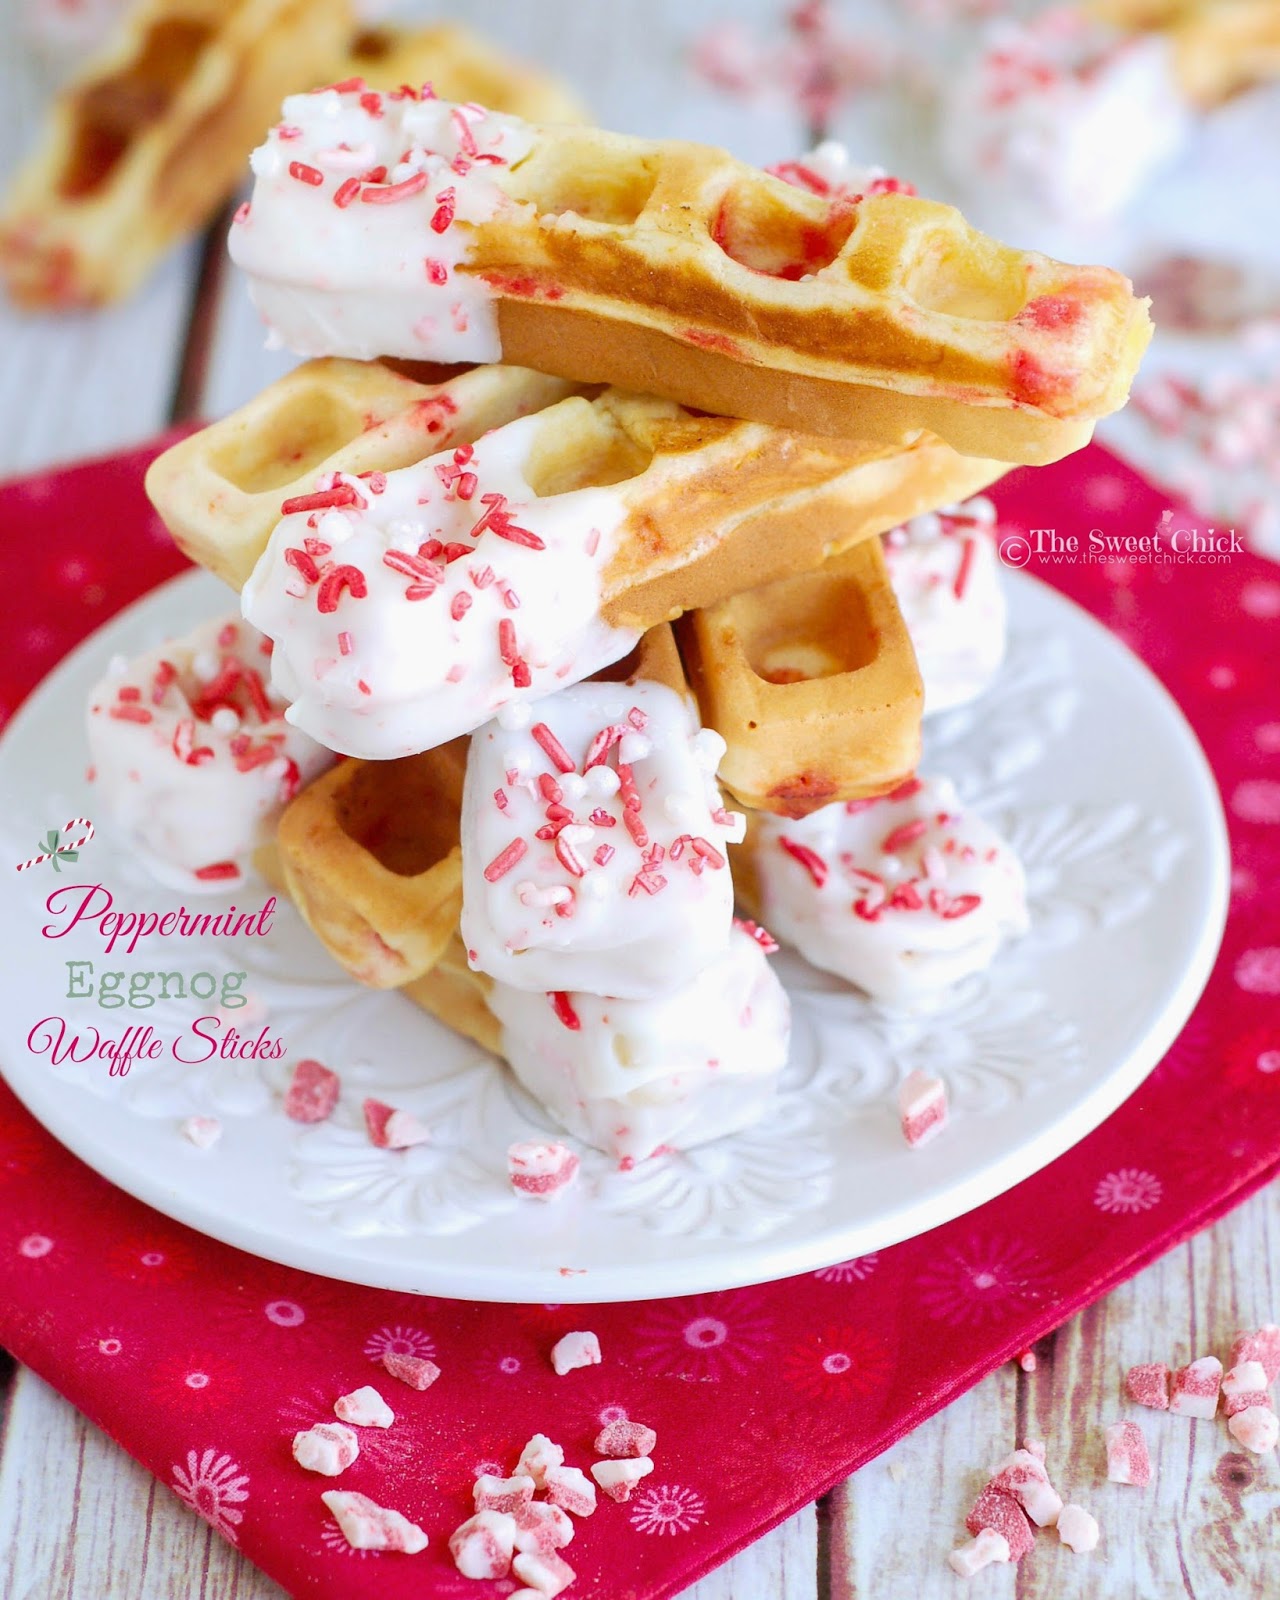 Peppermint Eggnog Waffle Sticks by The Sweet Chick